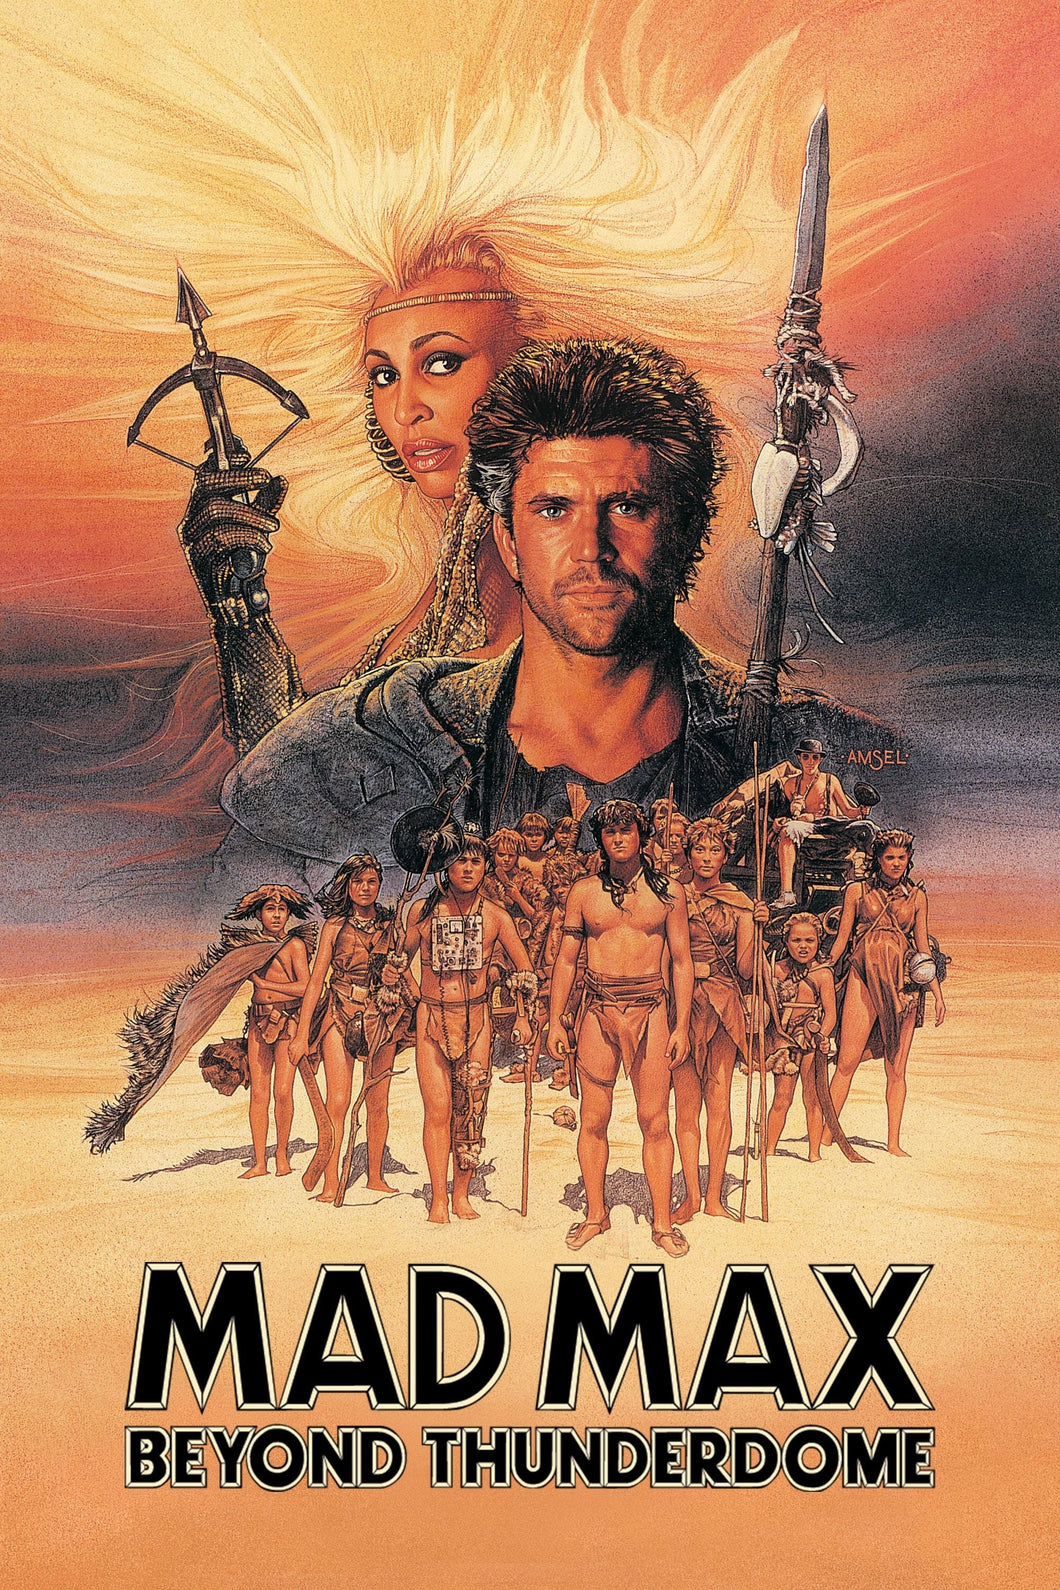 Mad Max Beyond Thunderdome (1985) Movie Poster High Quality Glossy Paper A1 A2 A3 A4 A3 Framed or Unframed!!!